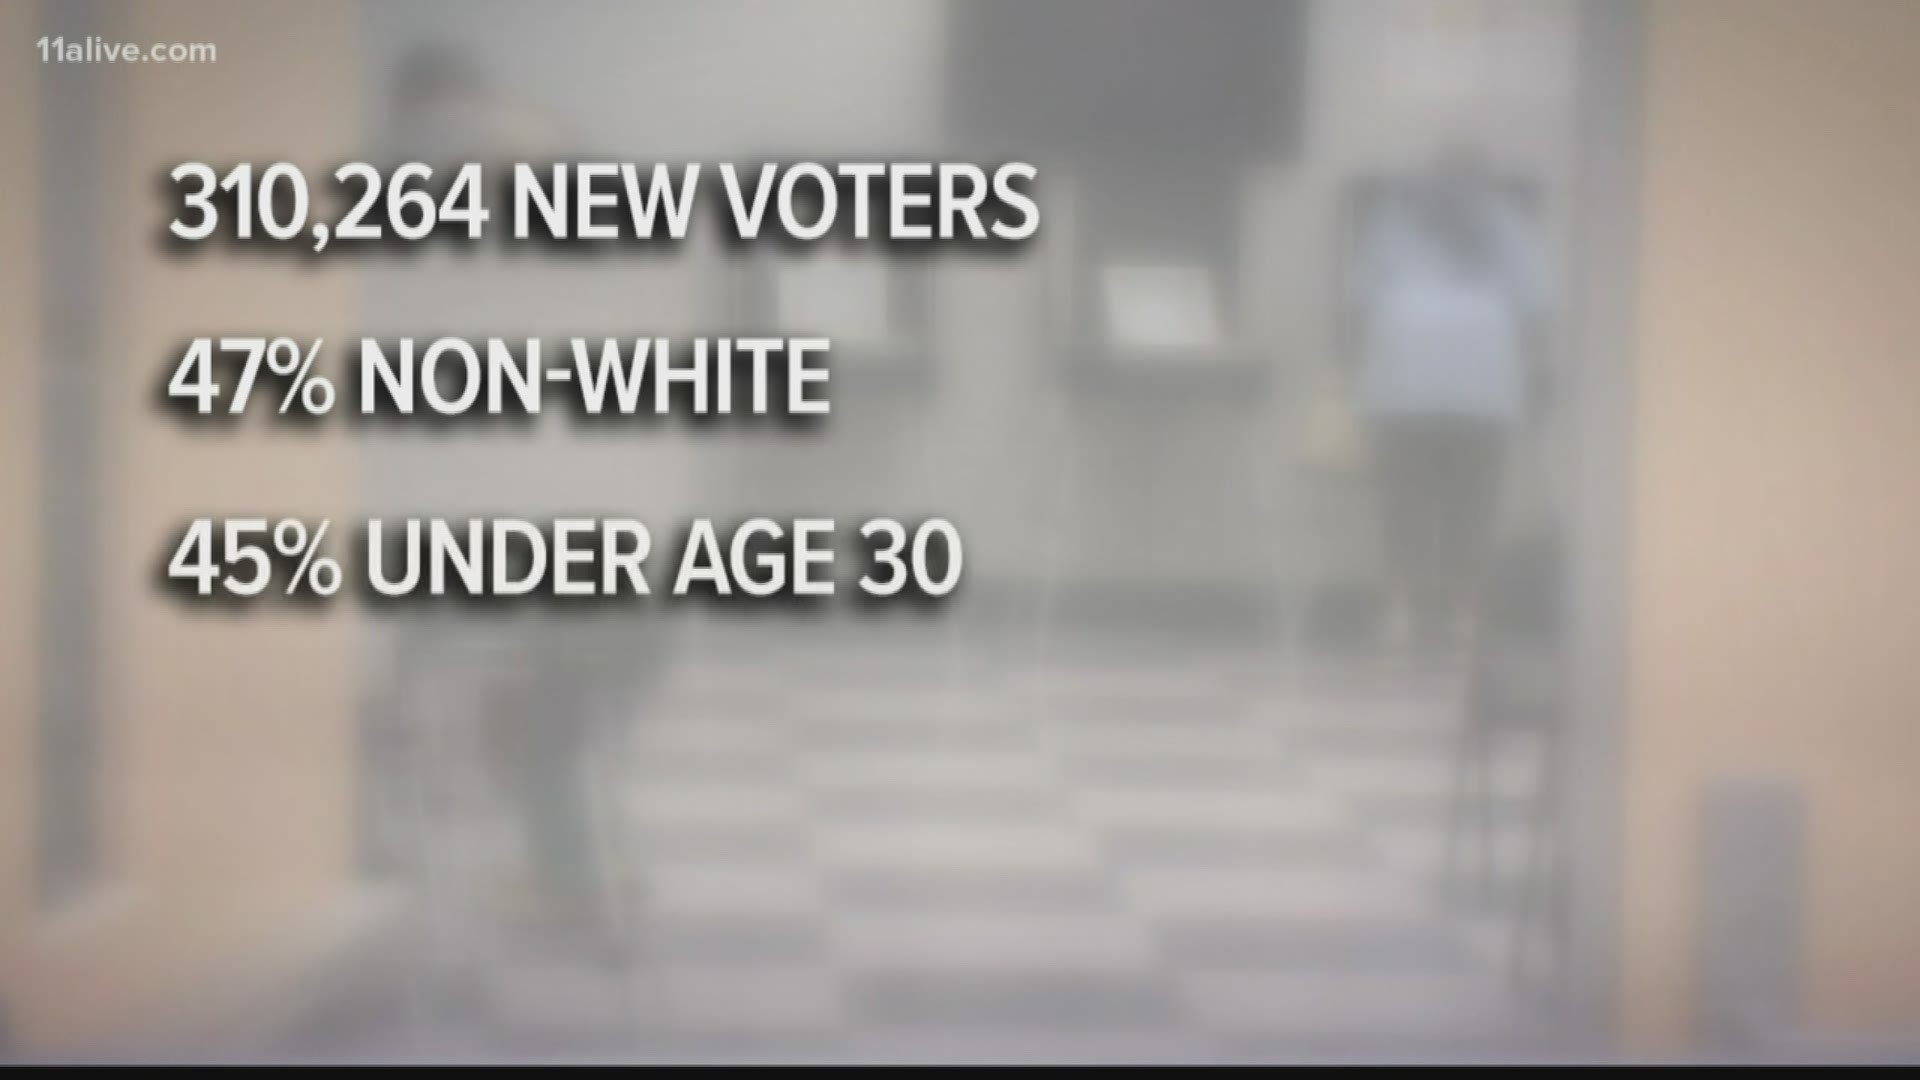 The state says more than 310,000 new voters have registered in 2019.